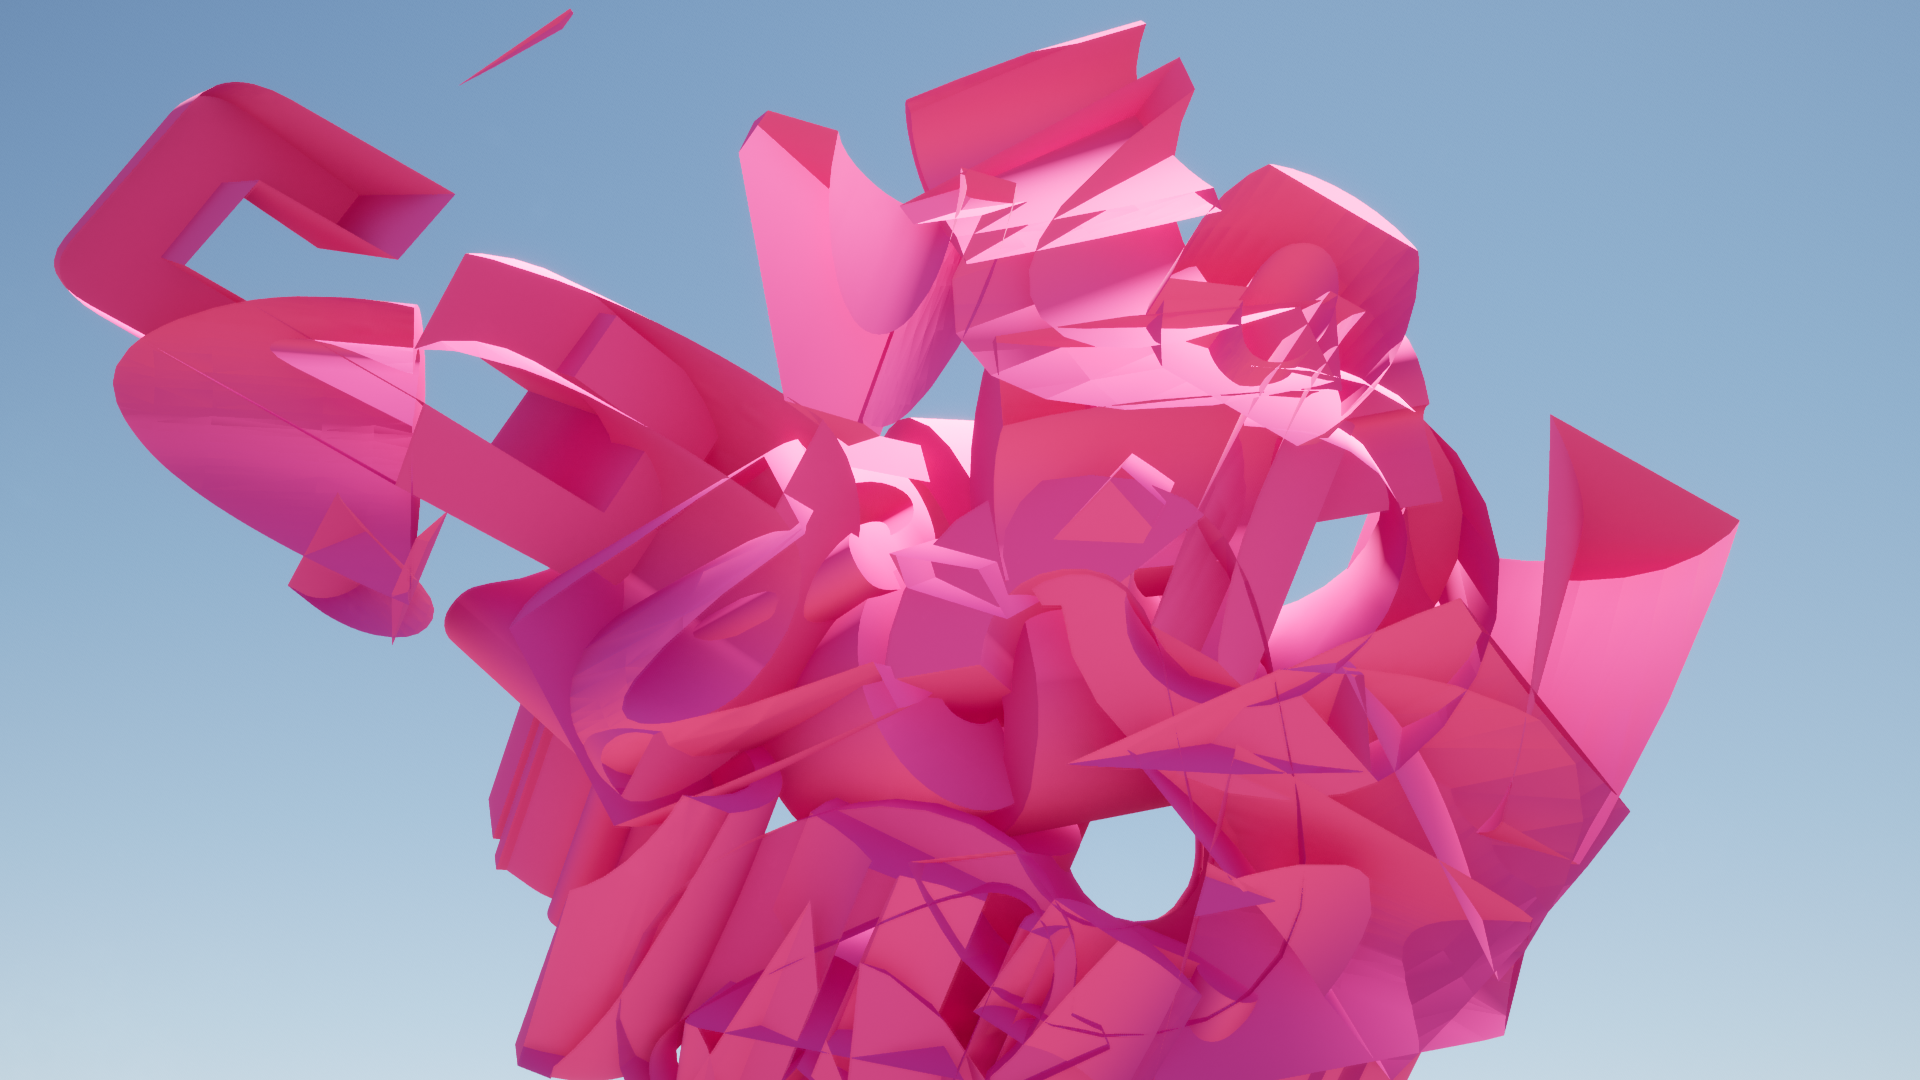 digital rendering of the letter c in an architectural fashion in pink by making and meaning student Danielle harden